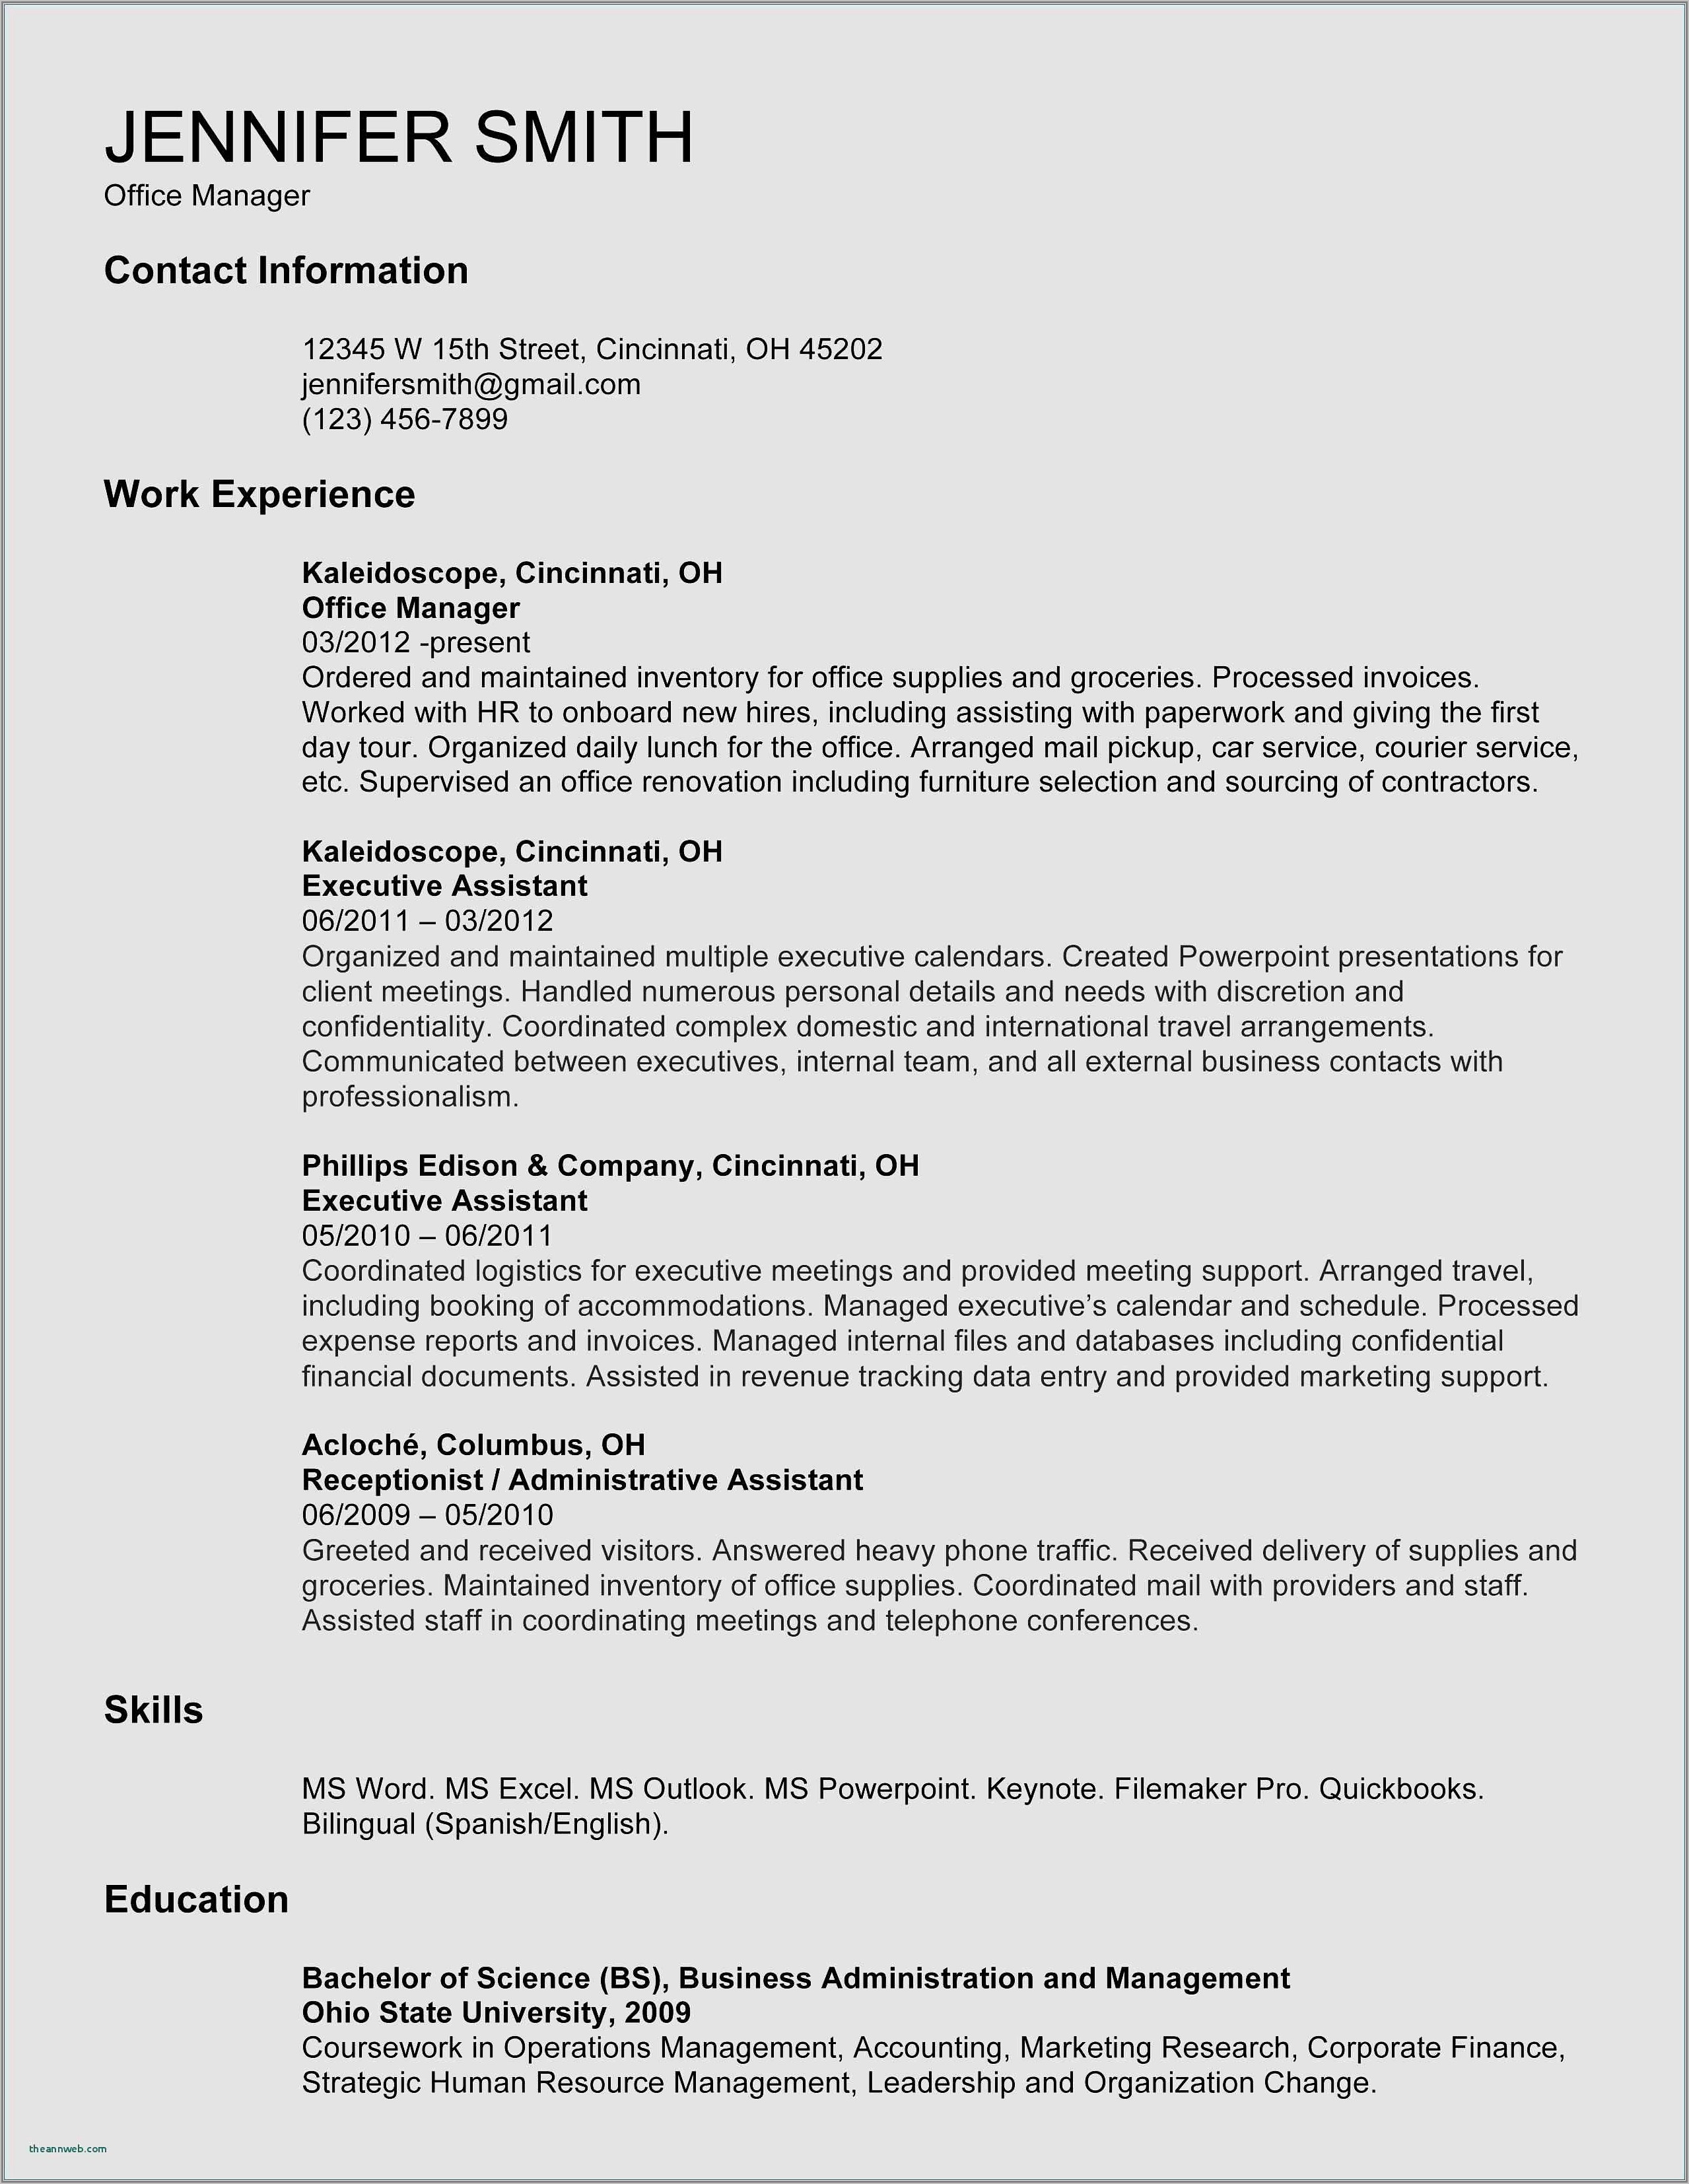 Microsoft Word Templates For Resumes And Letters